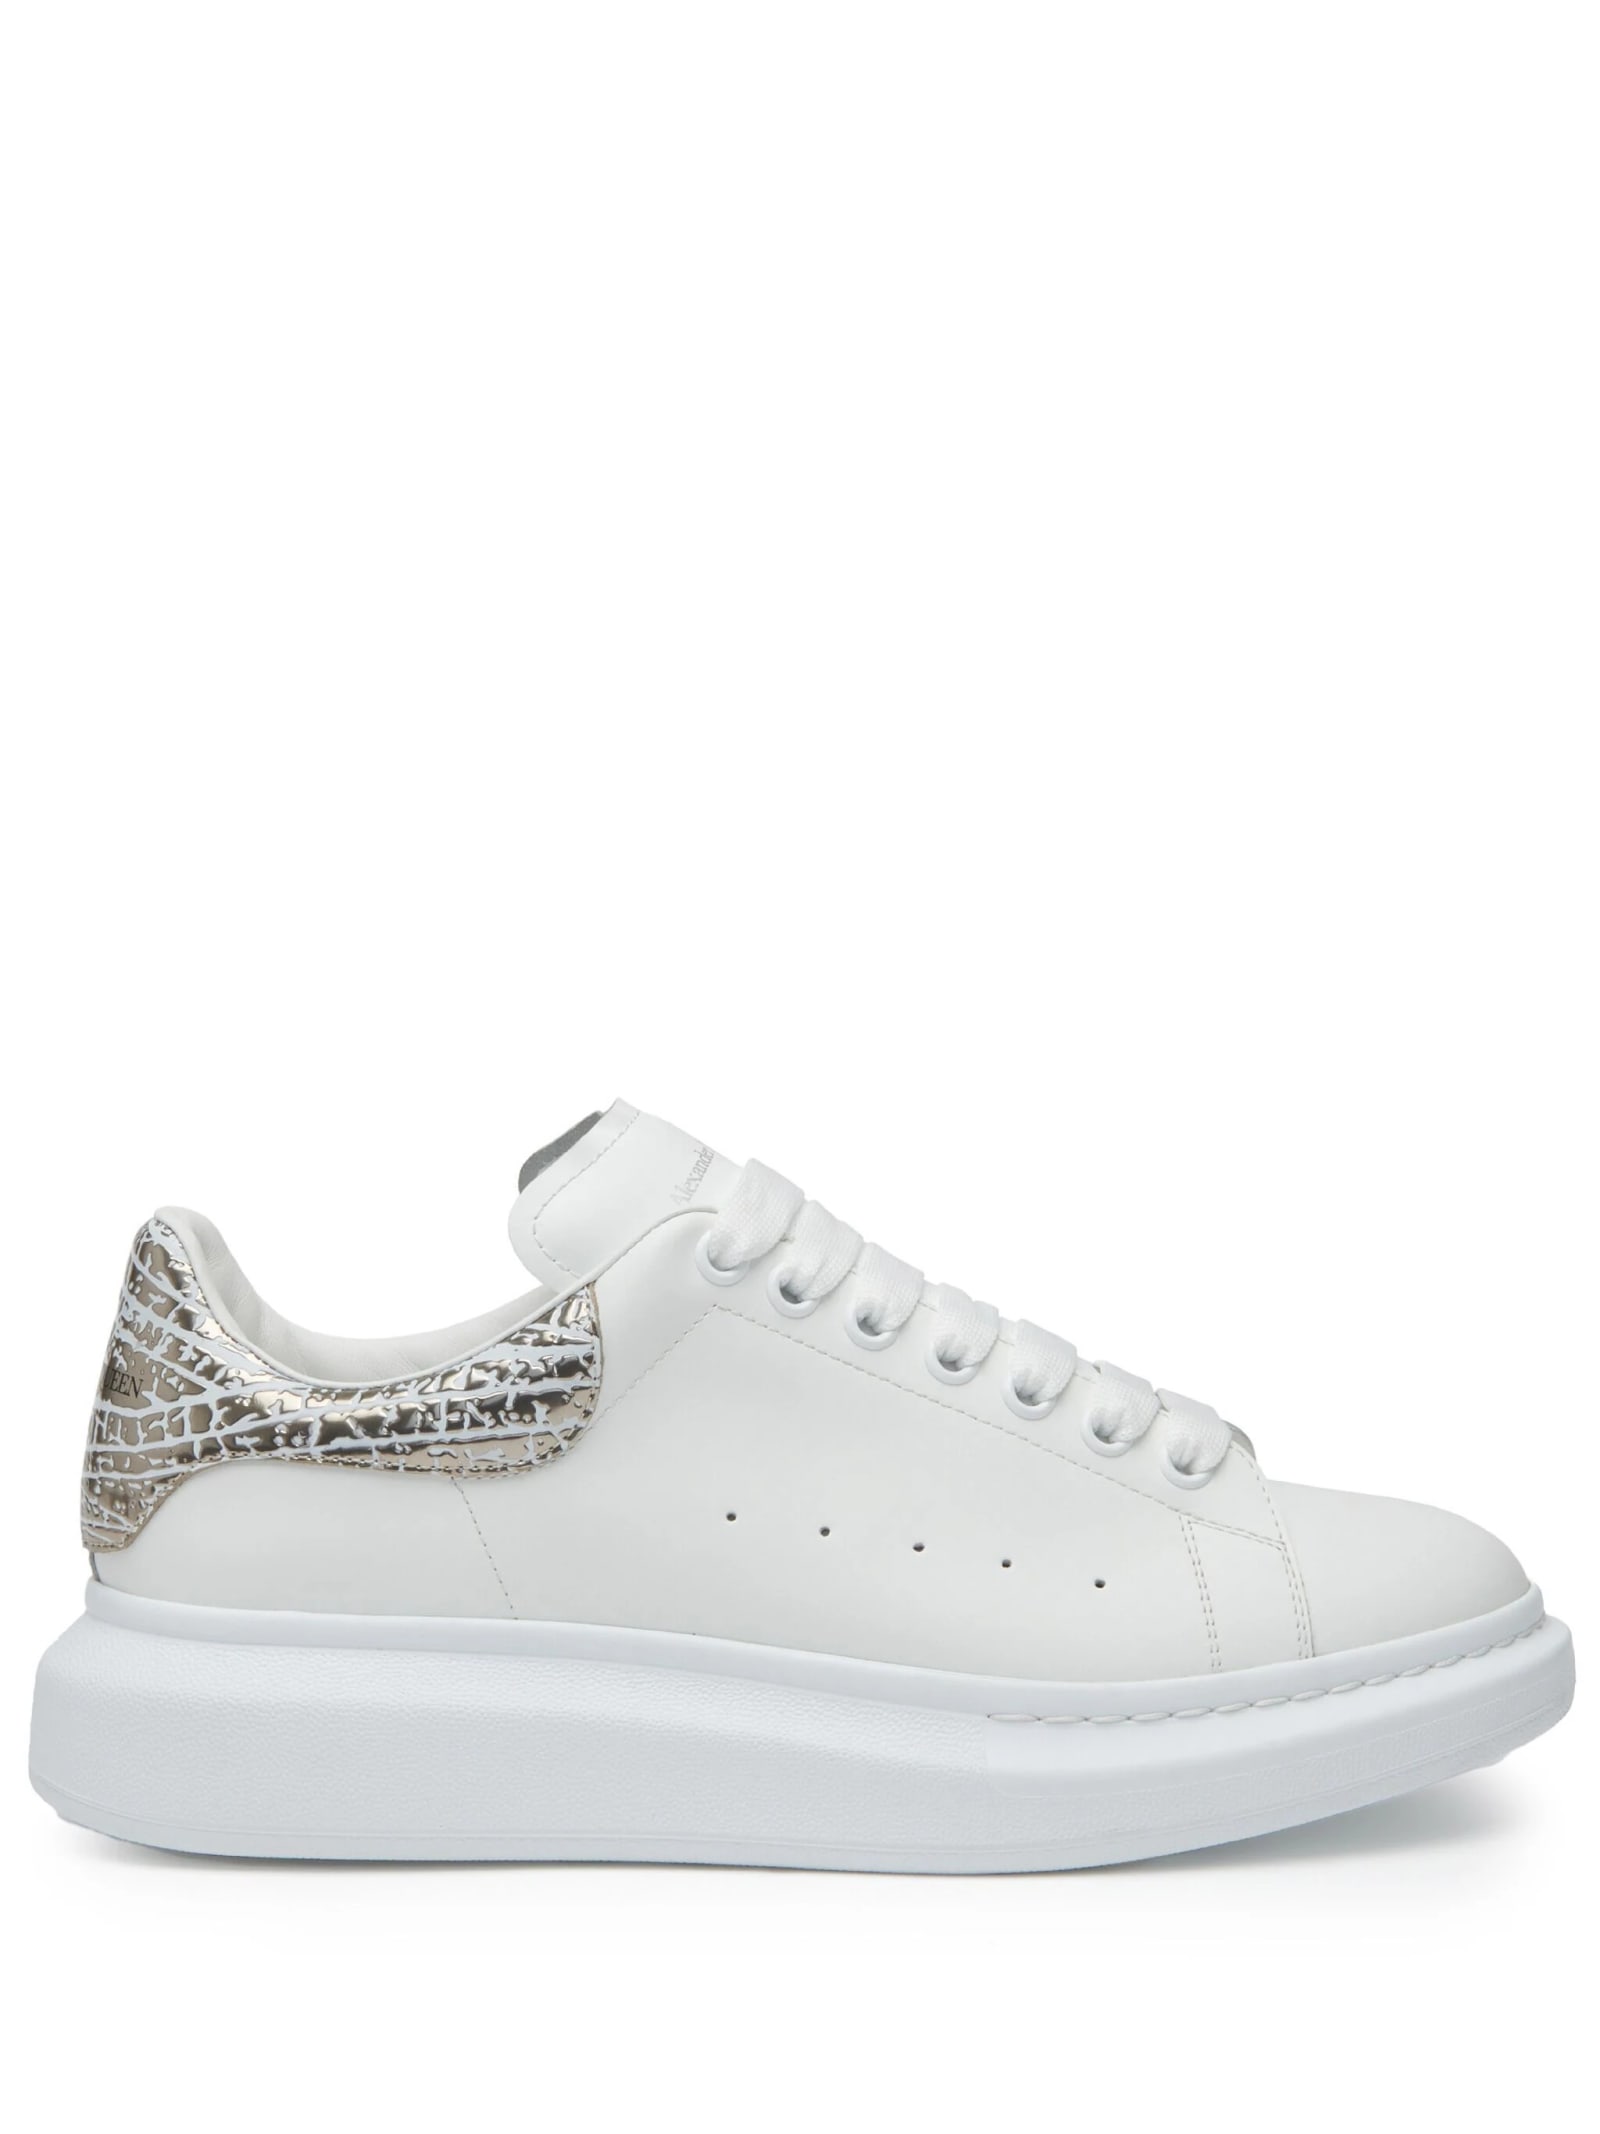 Alexander Mcqueen Oversized Sneakers In White And Silver